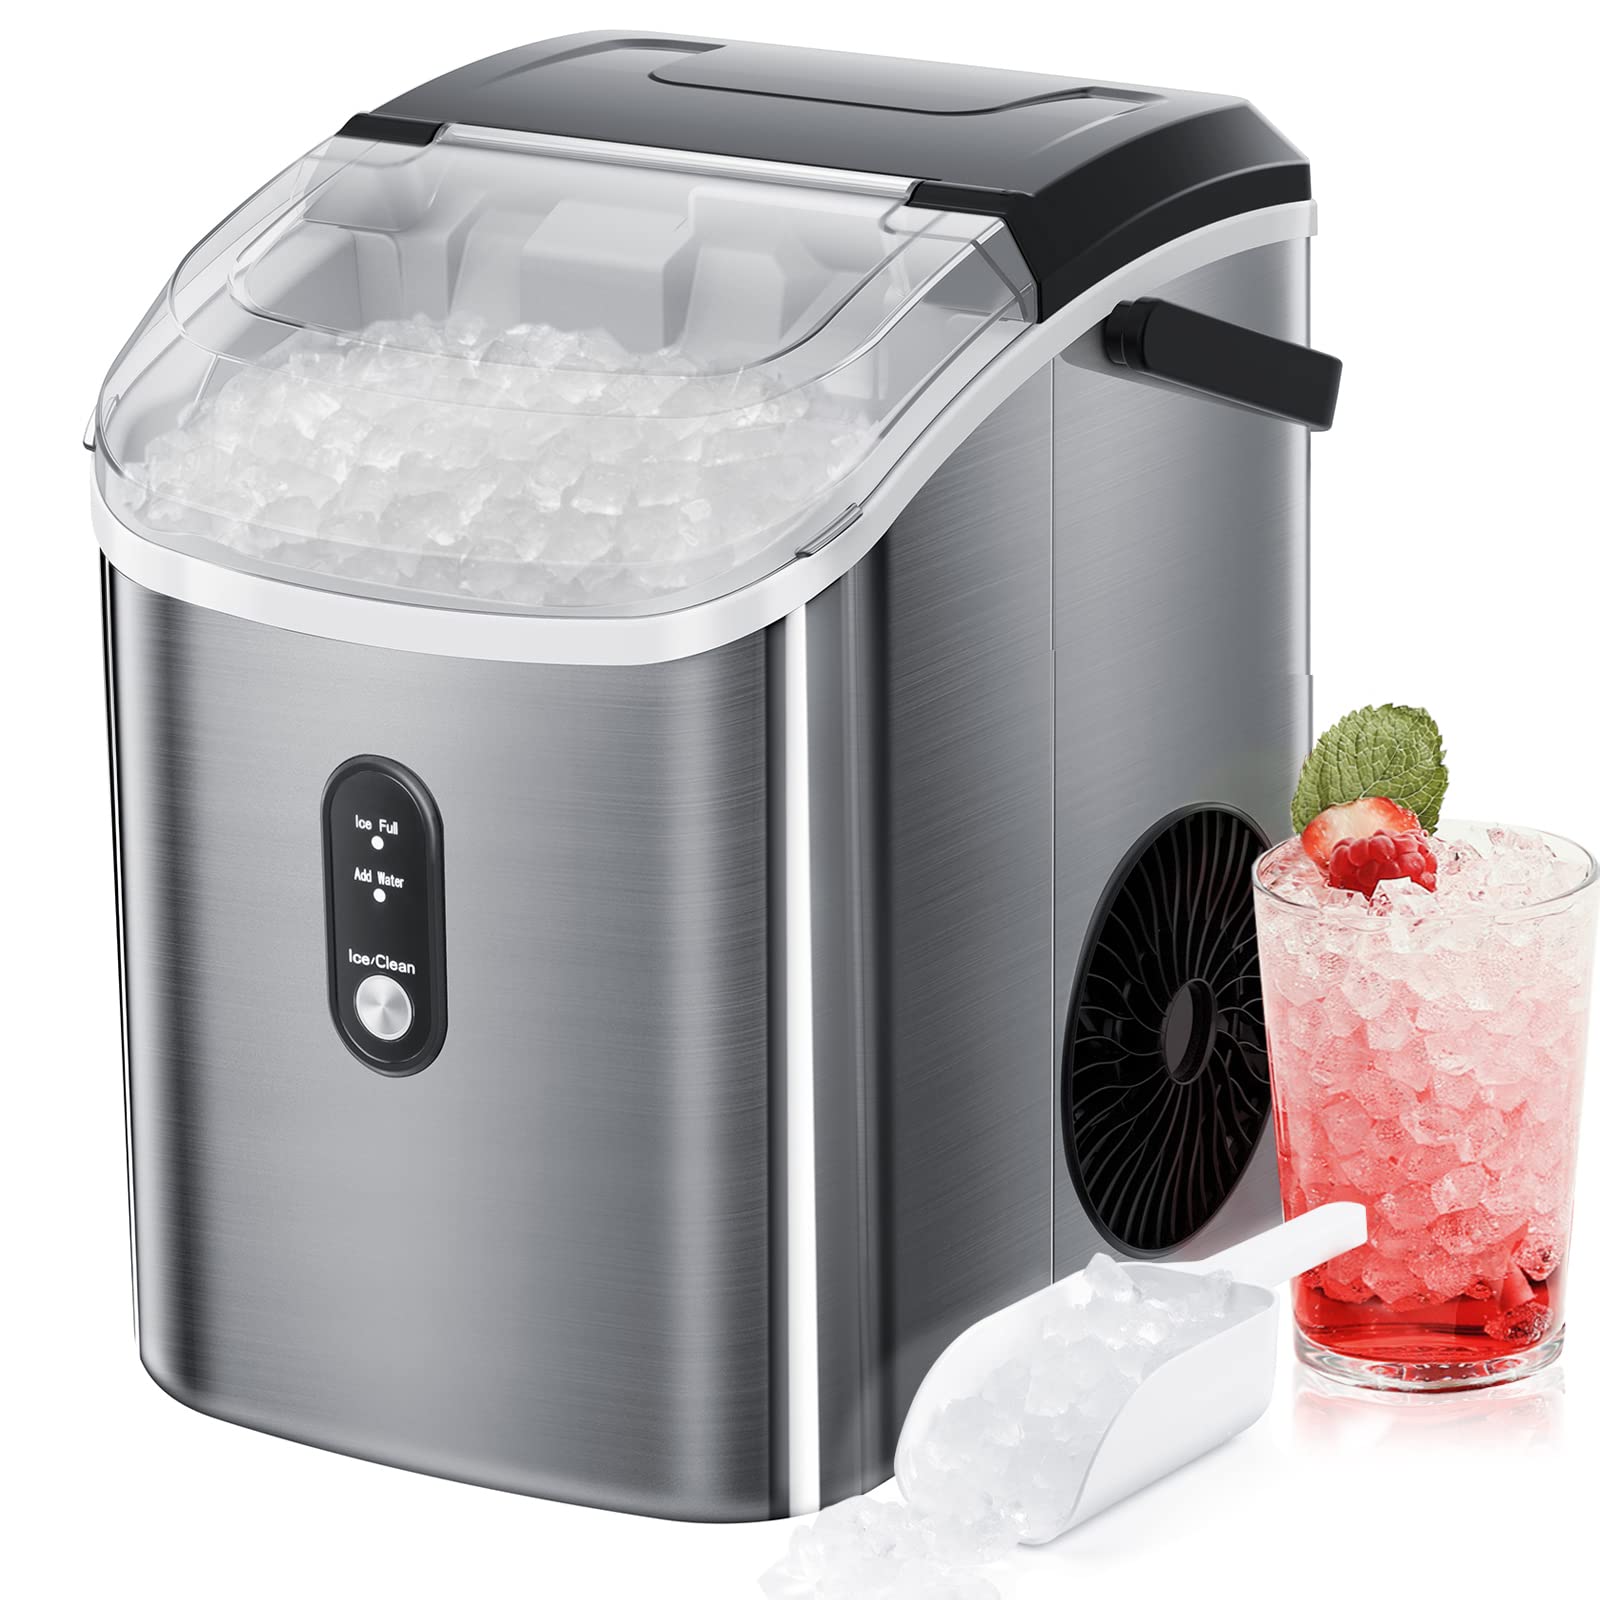 R.W.FLAME 44 lb. lb. Daily Production Nugget Countertop Ice Maker with Self-Cleaning Function Finish: Green Z5820BN-GREEN-SZ